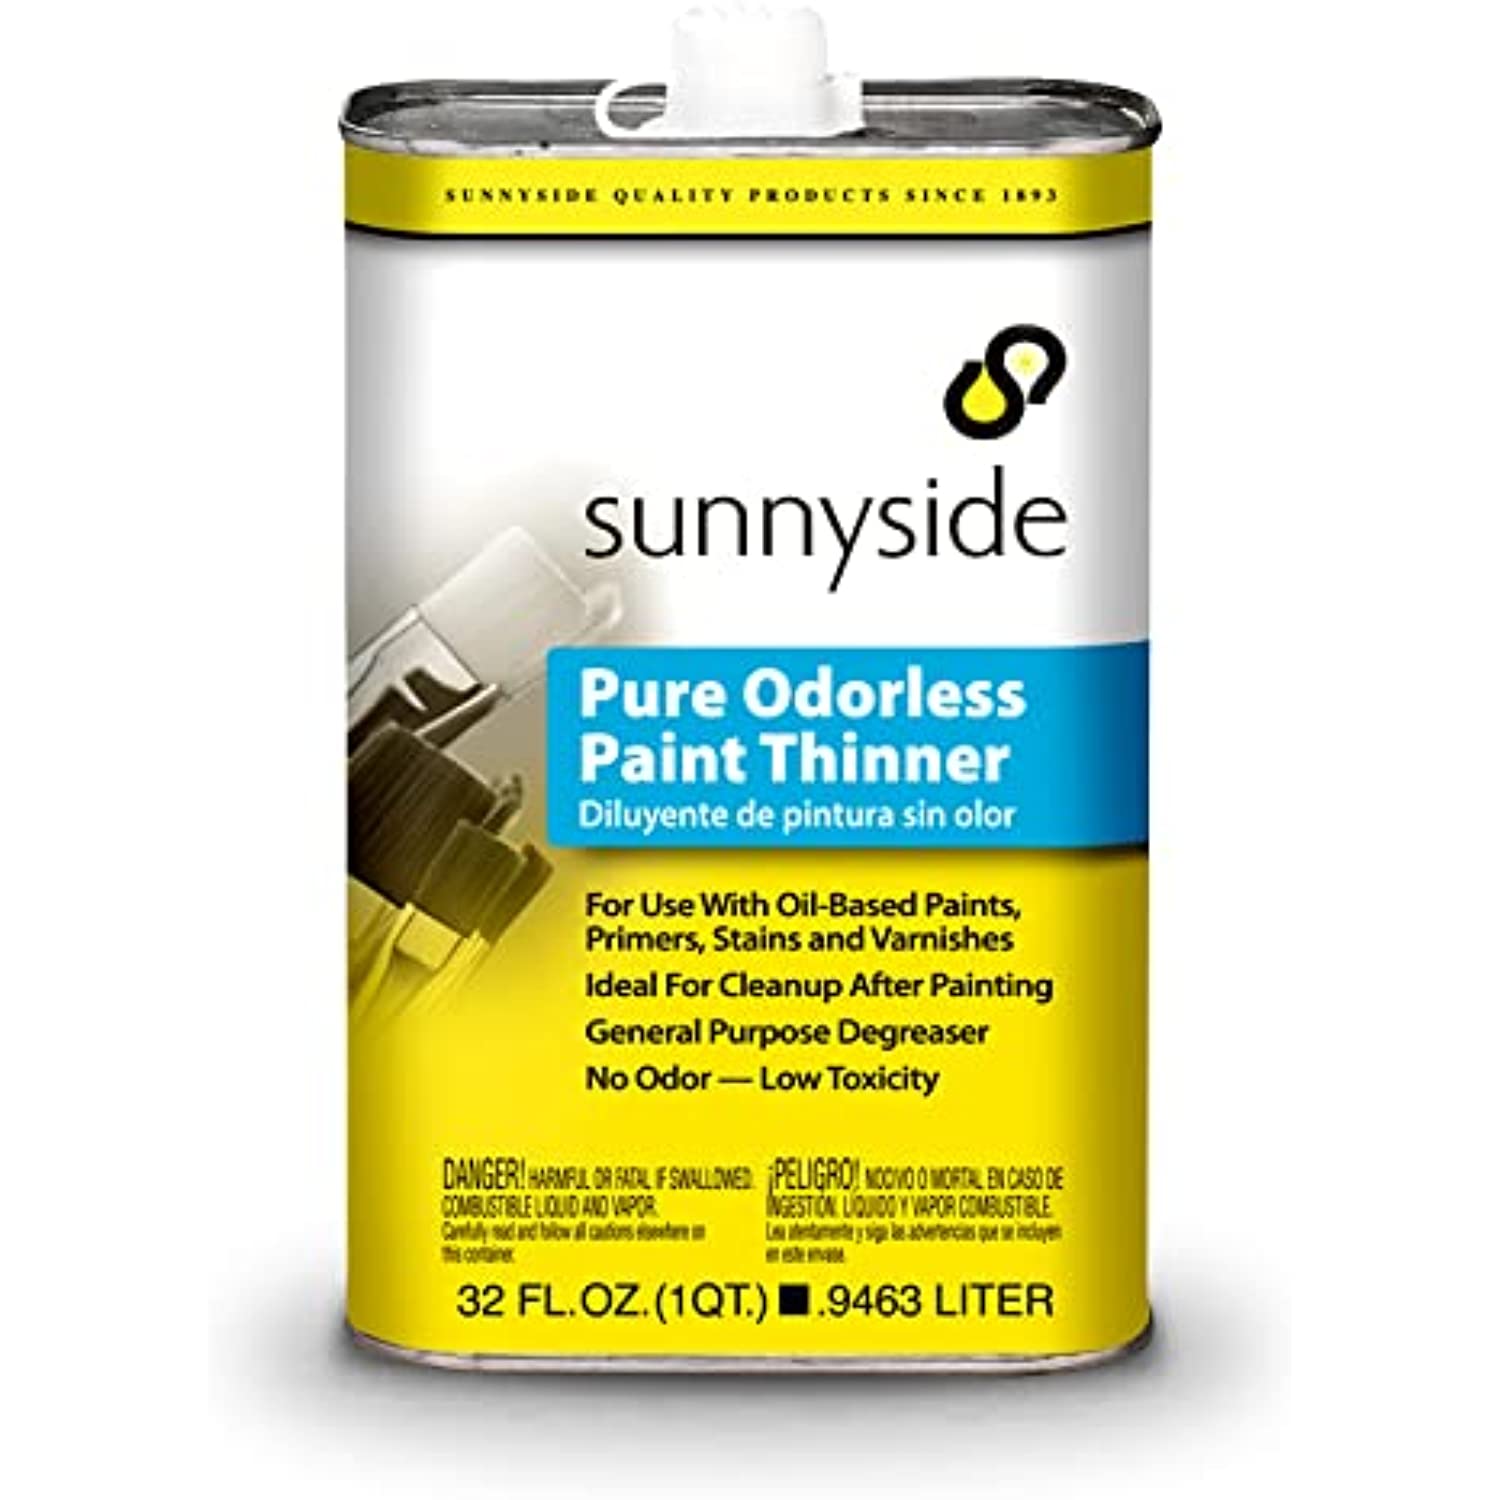 Sunnyside Pure Odorless Paint Thinner 1 Quart Odor-Free Quickly Thins Oil by Nature Non-Flammable with Low Toxicity Rate Available with Premium Quality Centaurus AZ Paint Brush